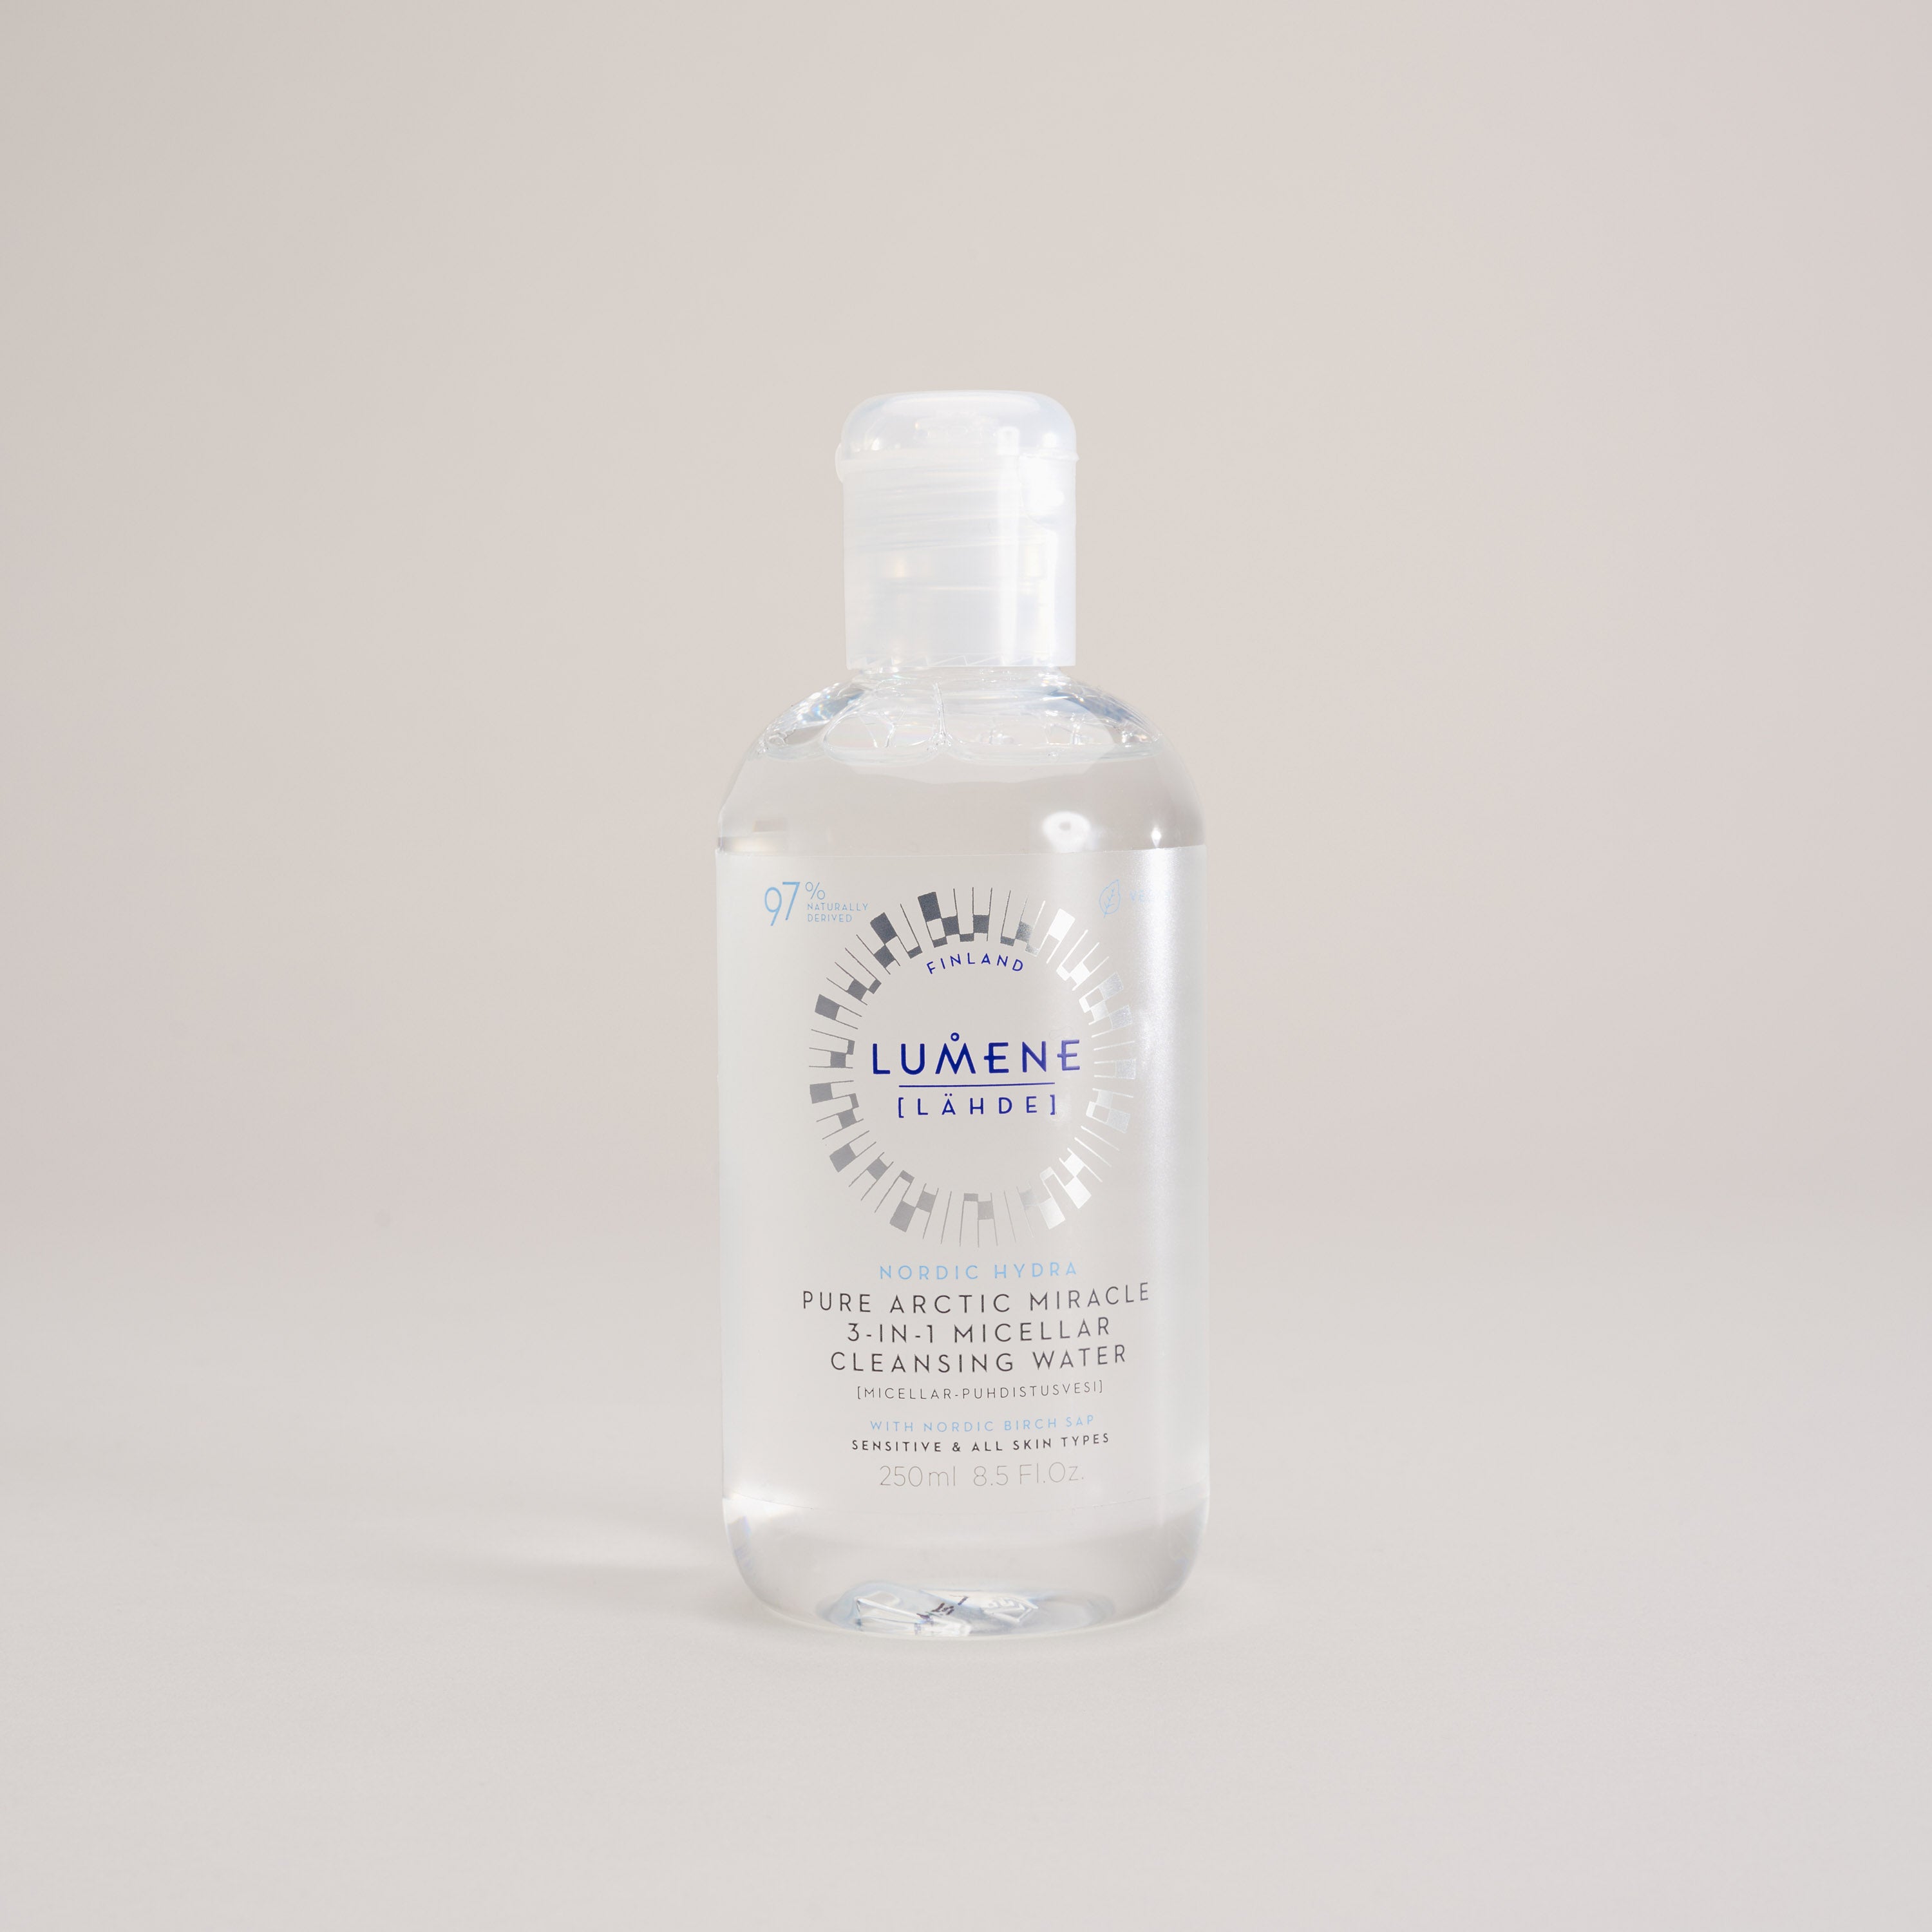 Pure Arctic Miracle 3-IN-1 Cleansing Water